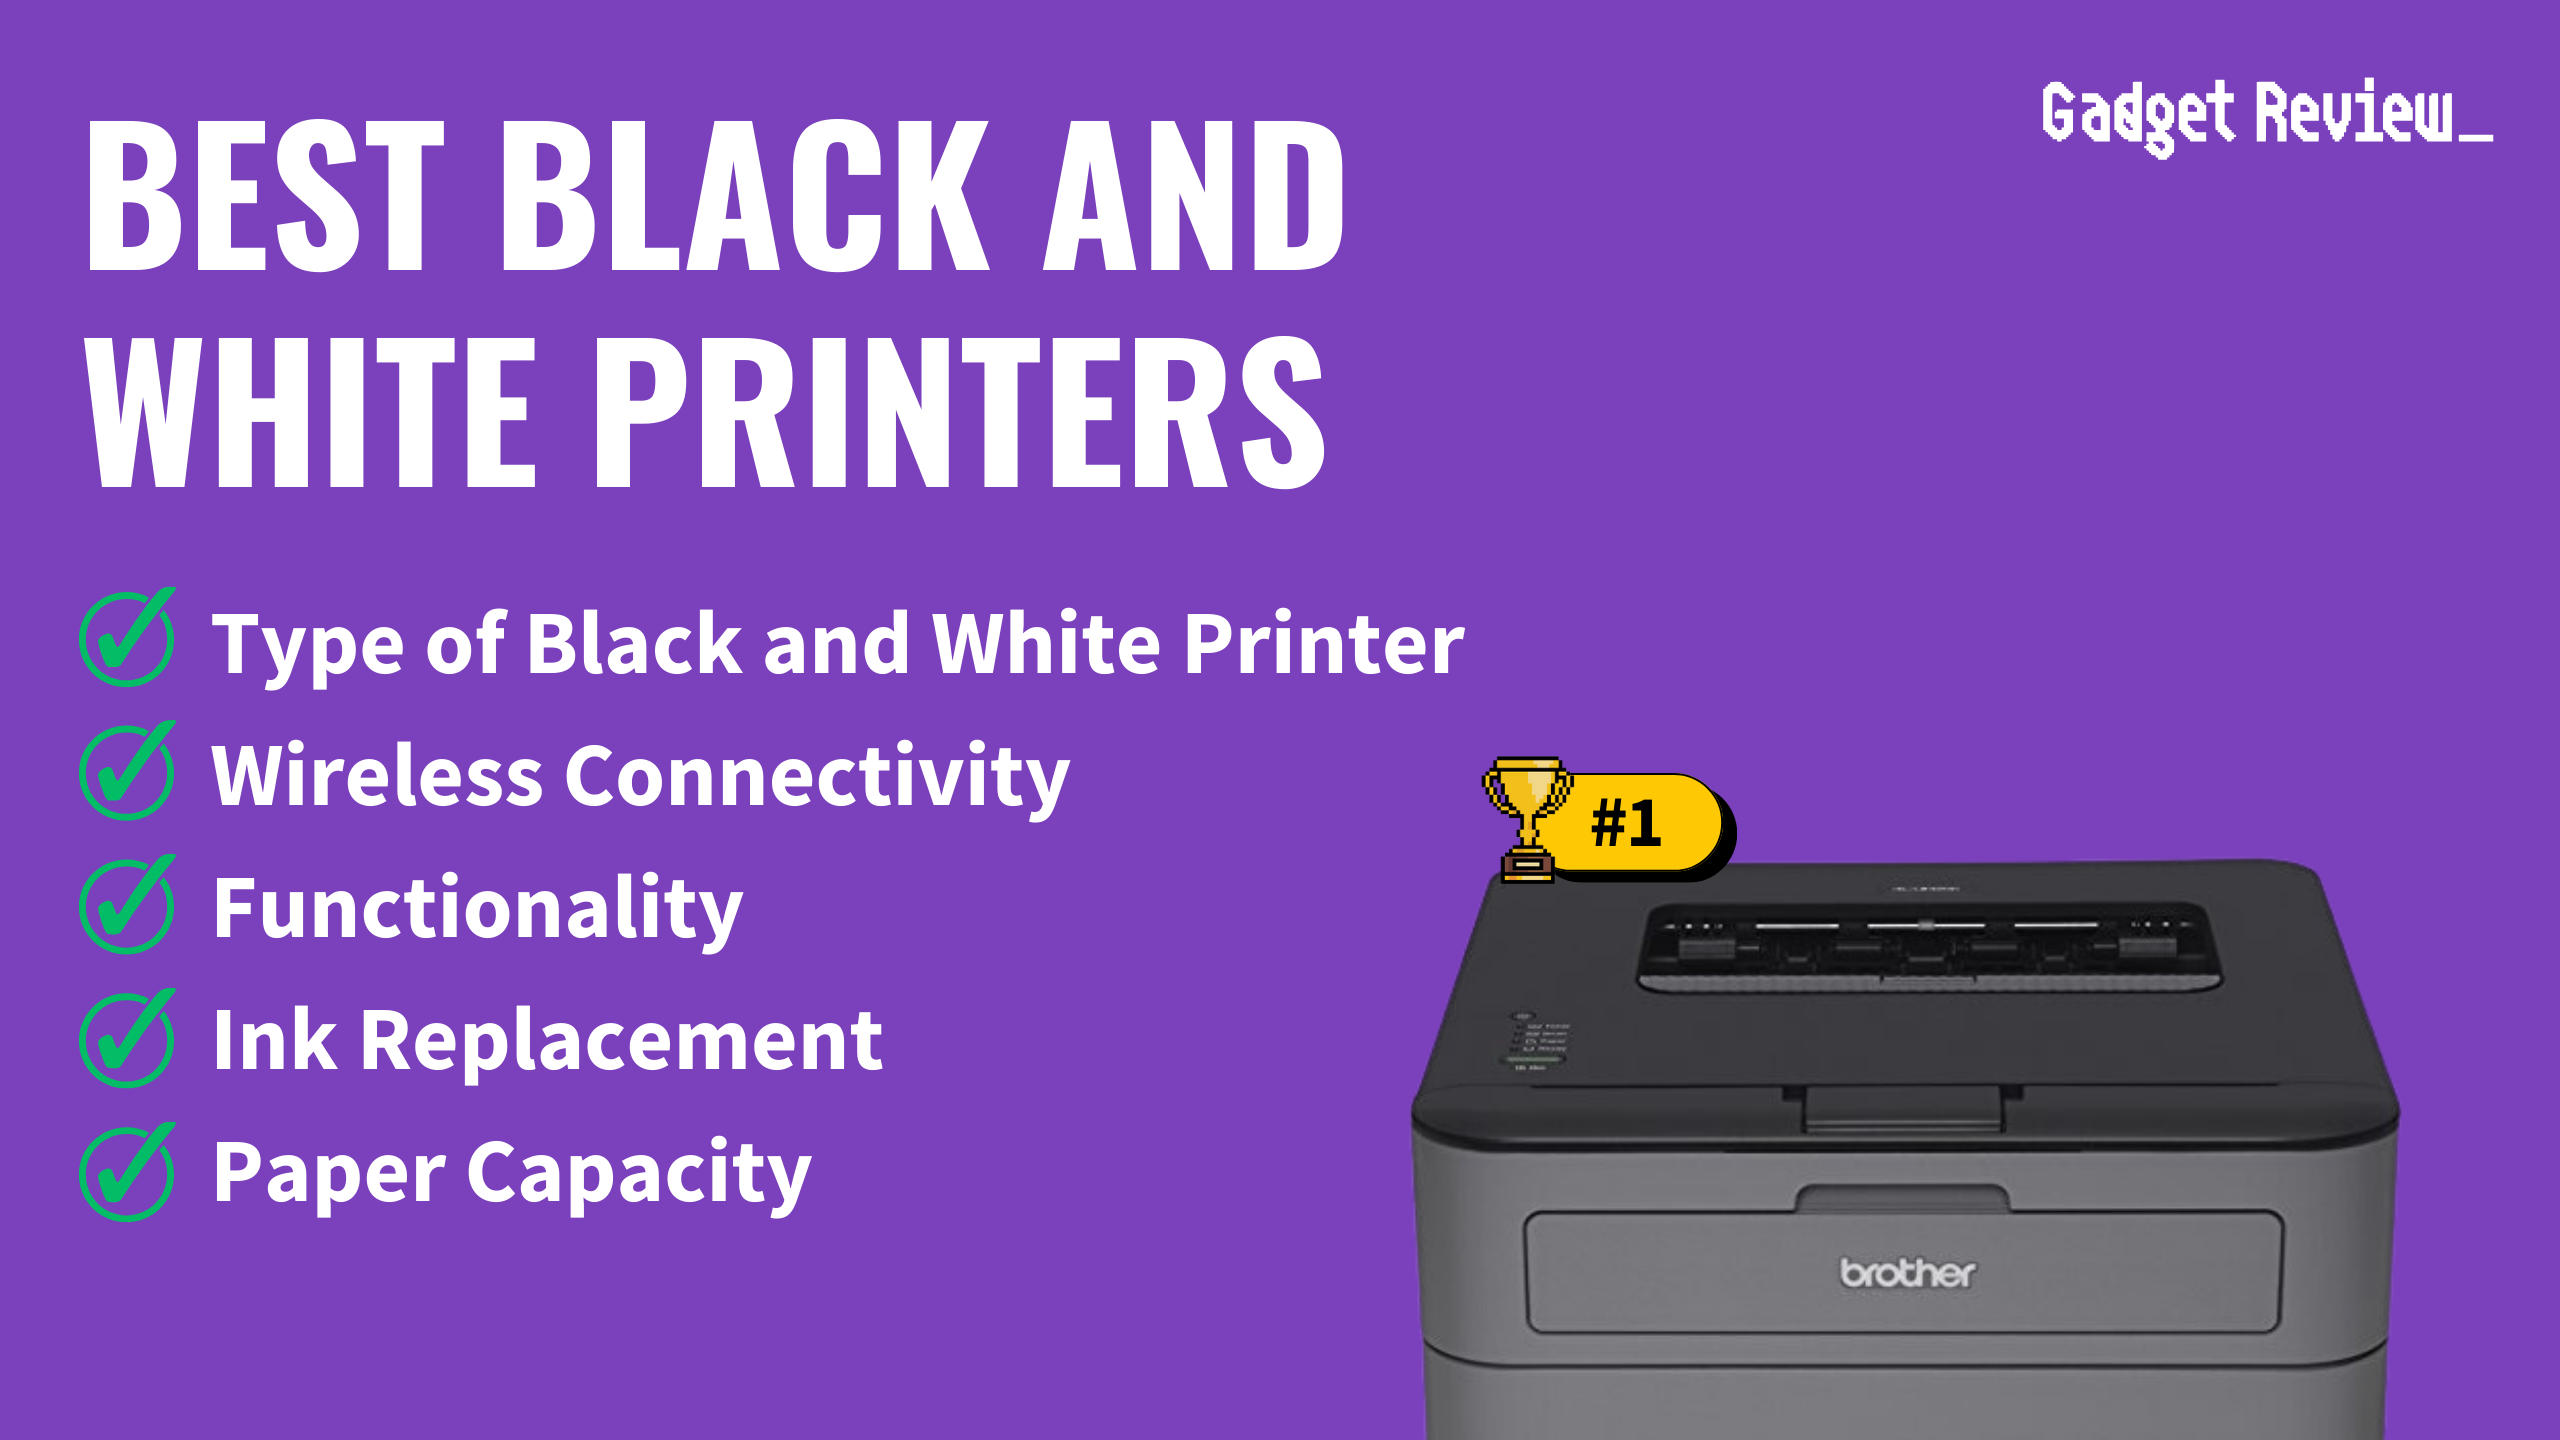 best black and white printer featured image that shows the top three best printer models